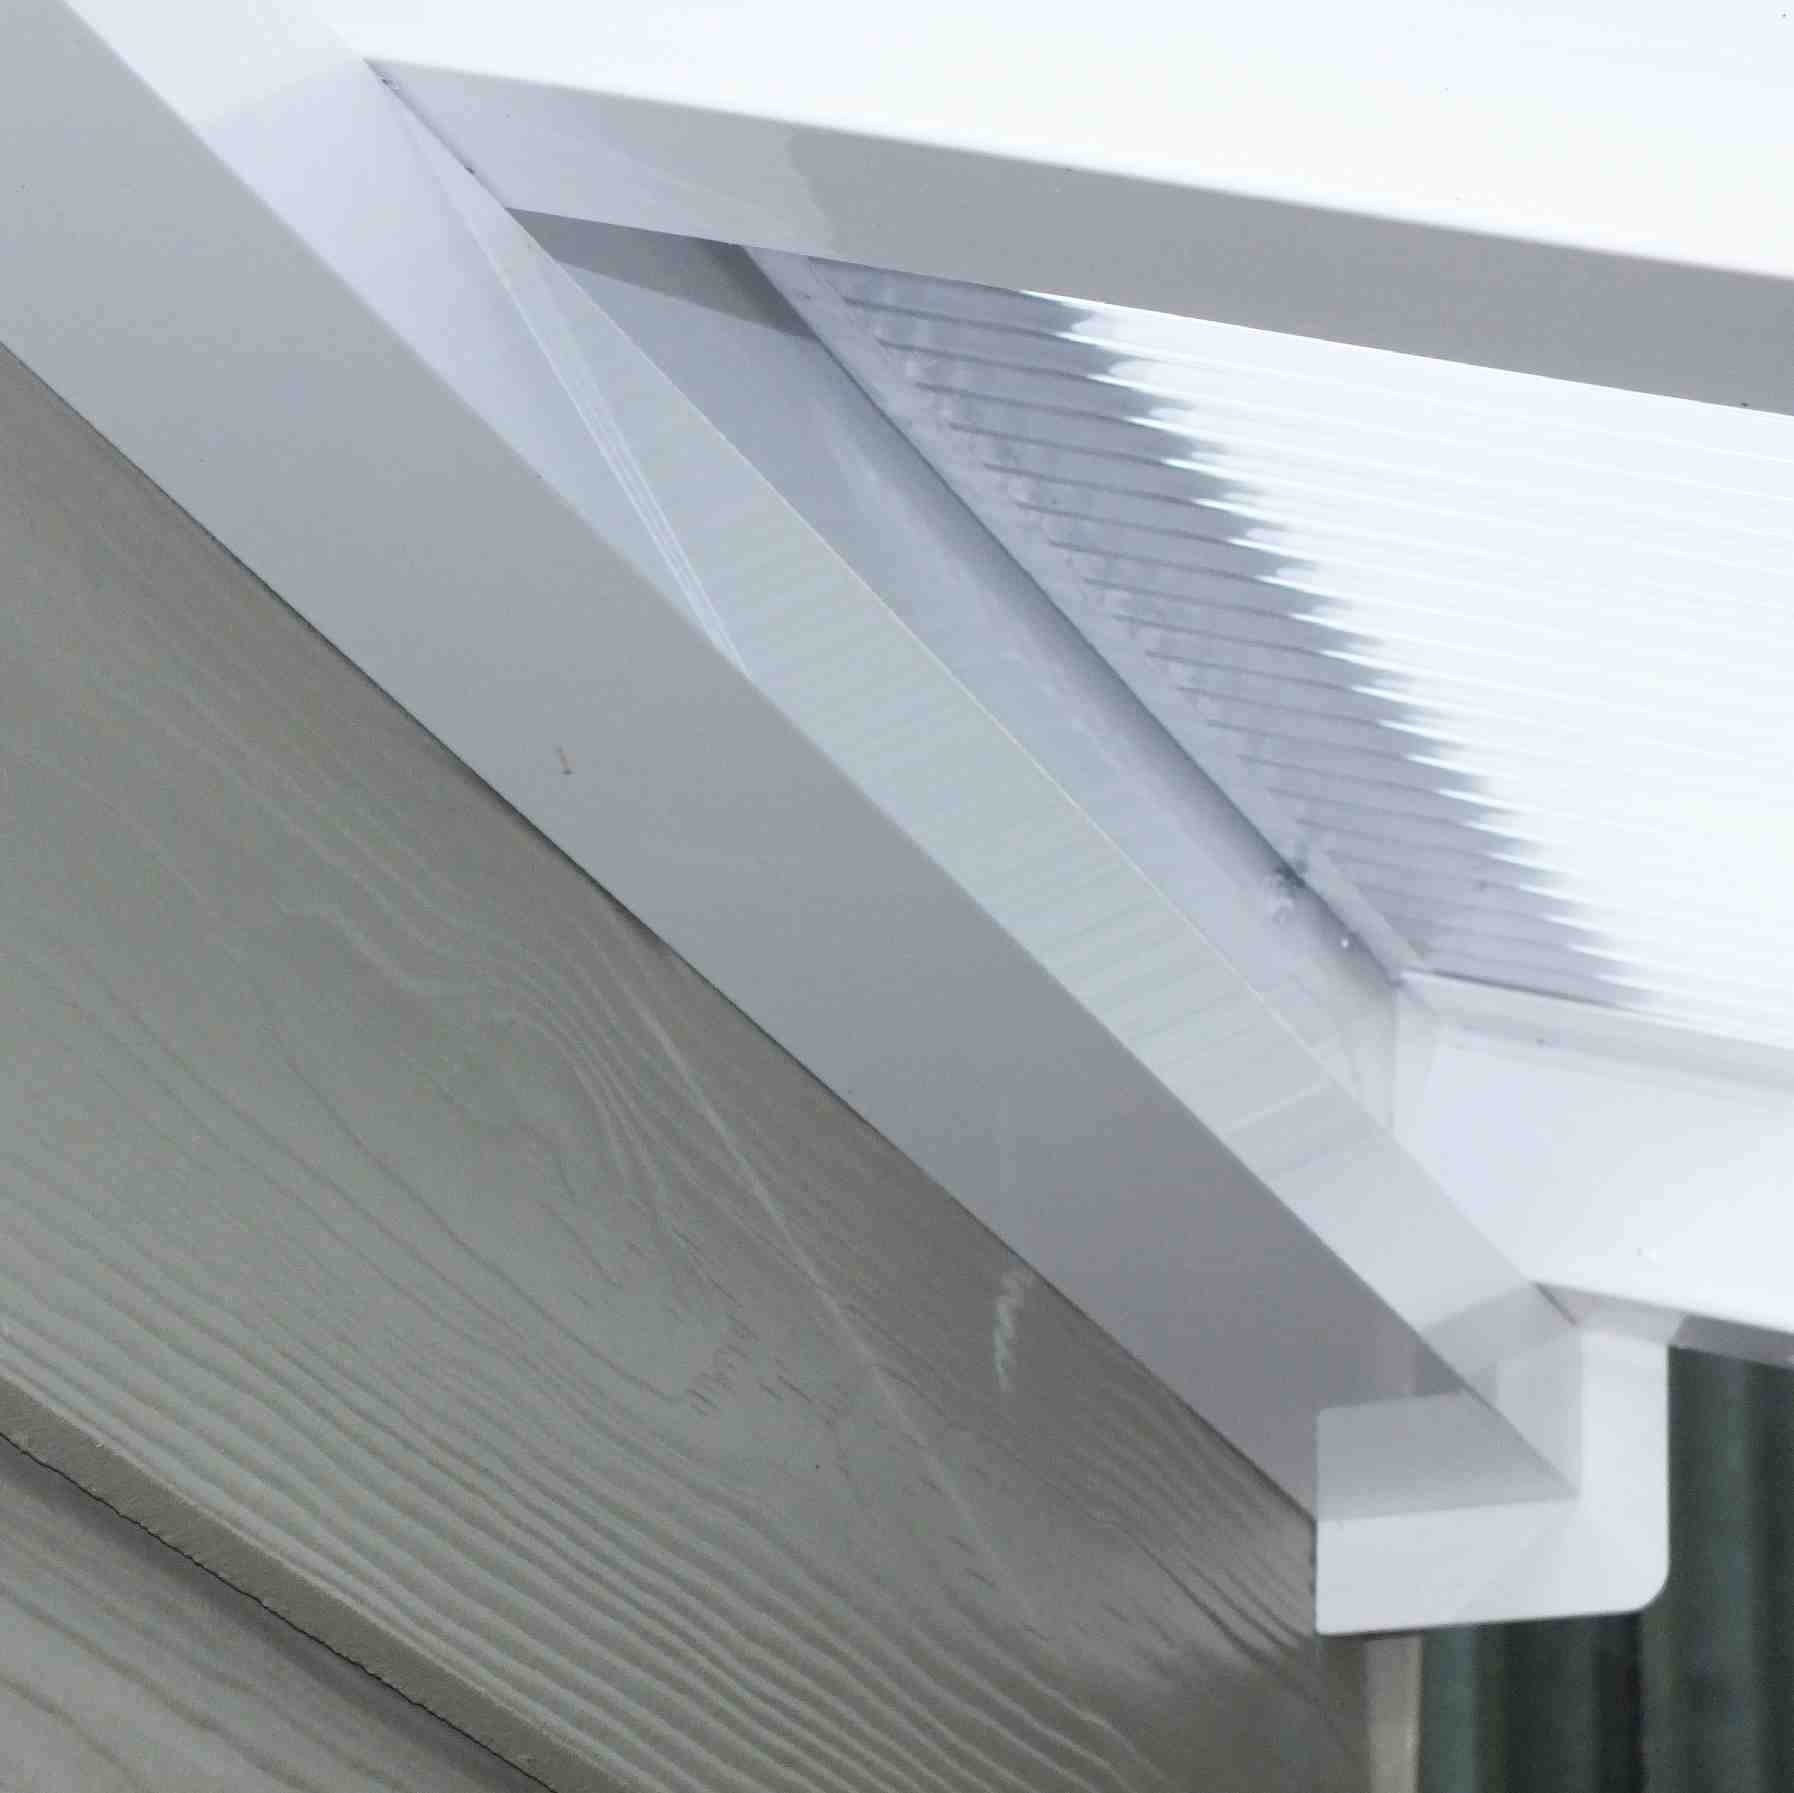 Great deals on Omega Verandah White with 6mm Glass Clear Plate Polycarbonate Glazing - 7.7m (W) x 3.5m (P), (4) Supporting Posts